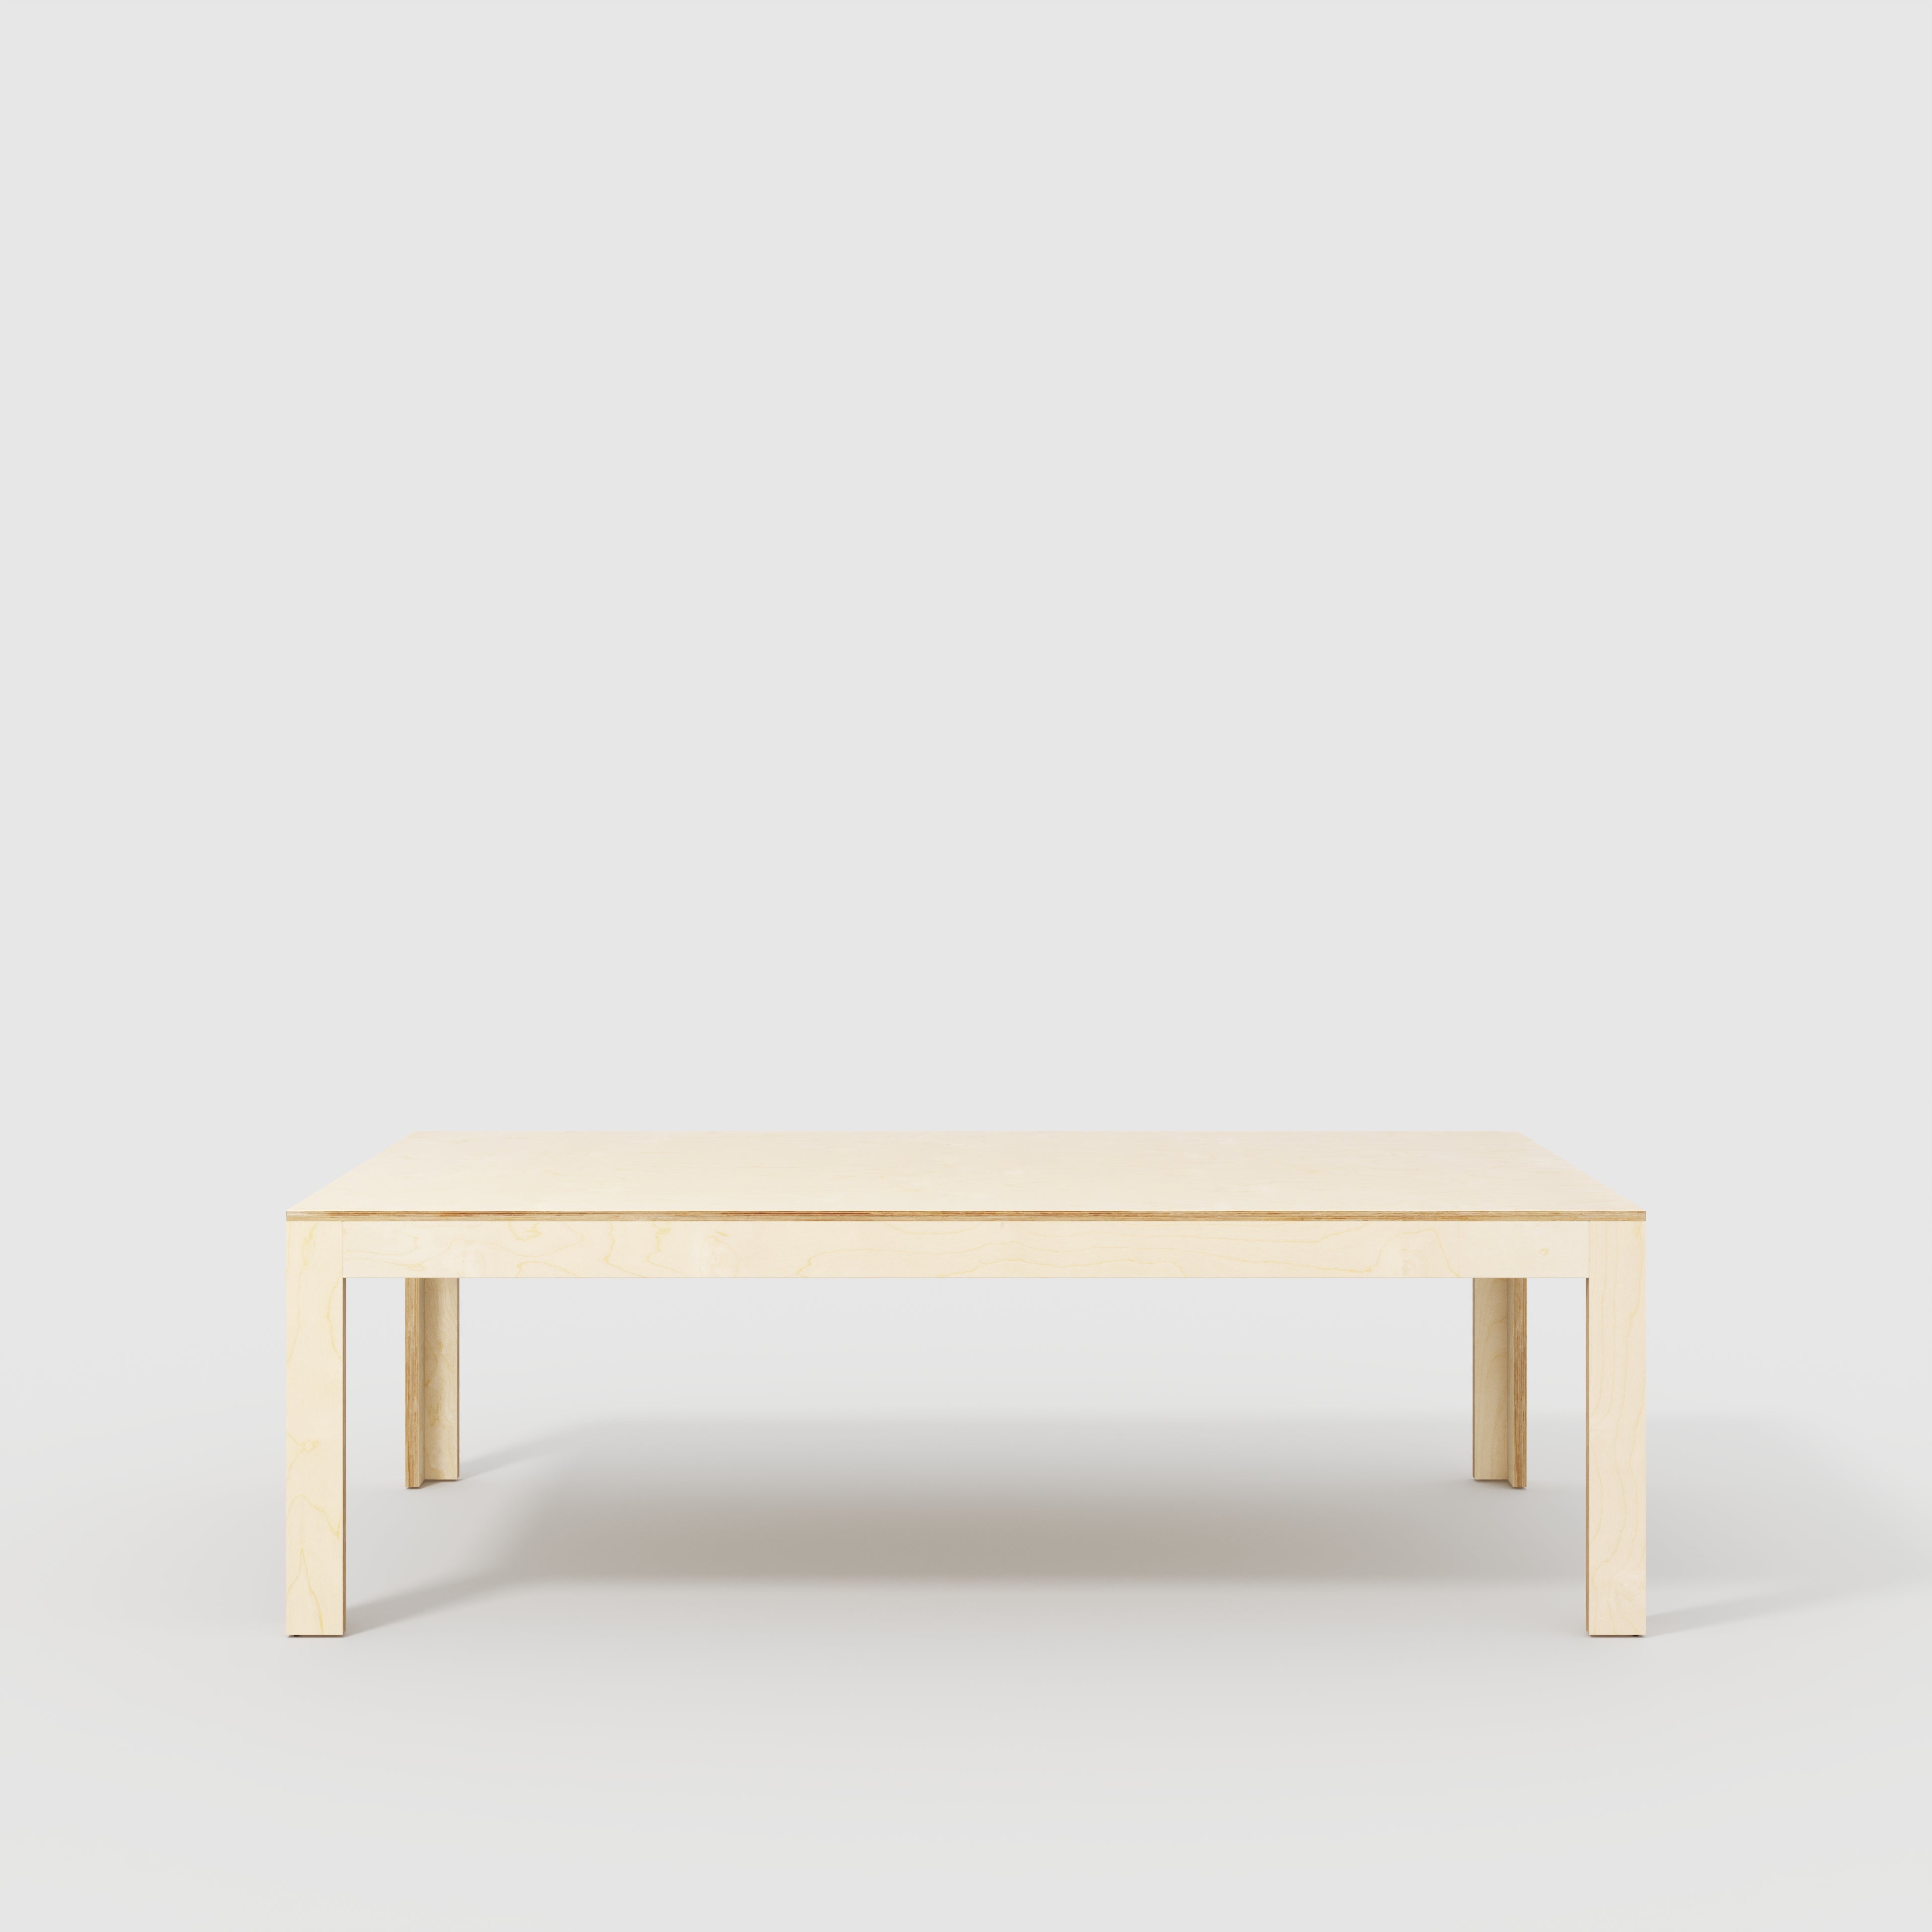 Table with Solid Frame - Plywood Birch - 2400(w) x 1200(d) x 750(h)